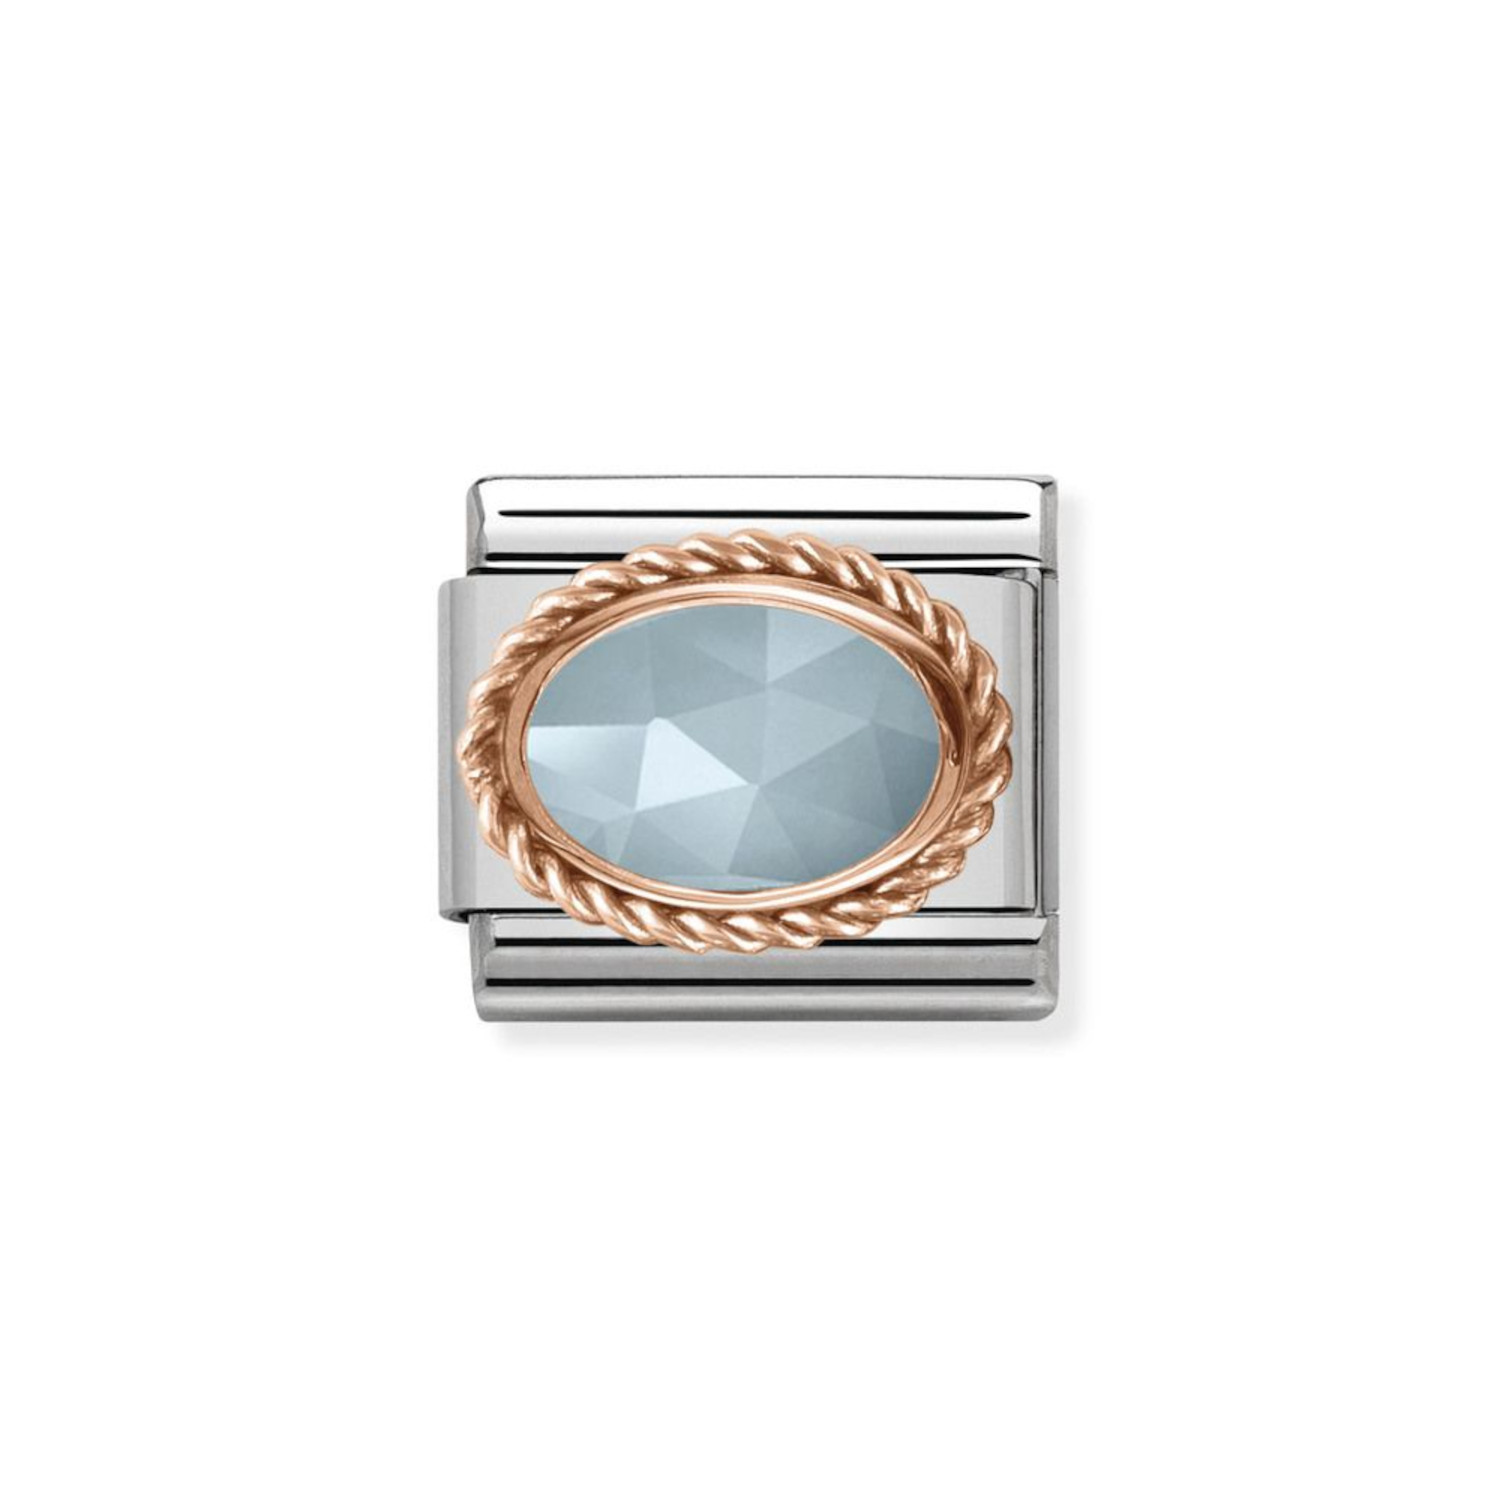 NOMINATION COMPOSABLE CLASSIC LINK IN 9K ROSE GOLD WITH AQUAMARINE STONE 430507/31